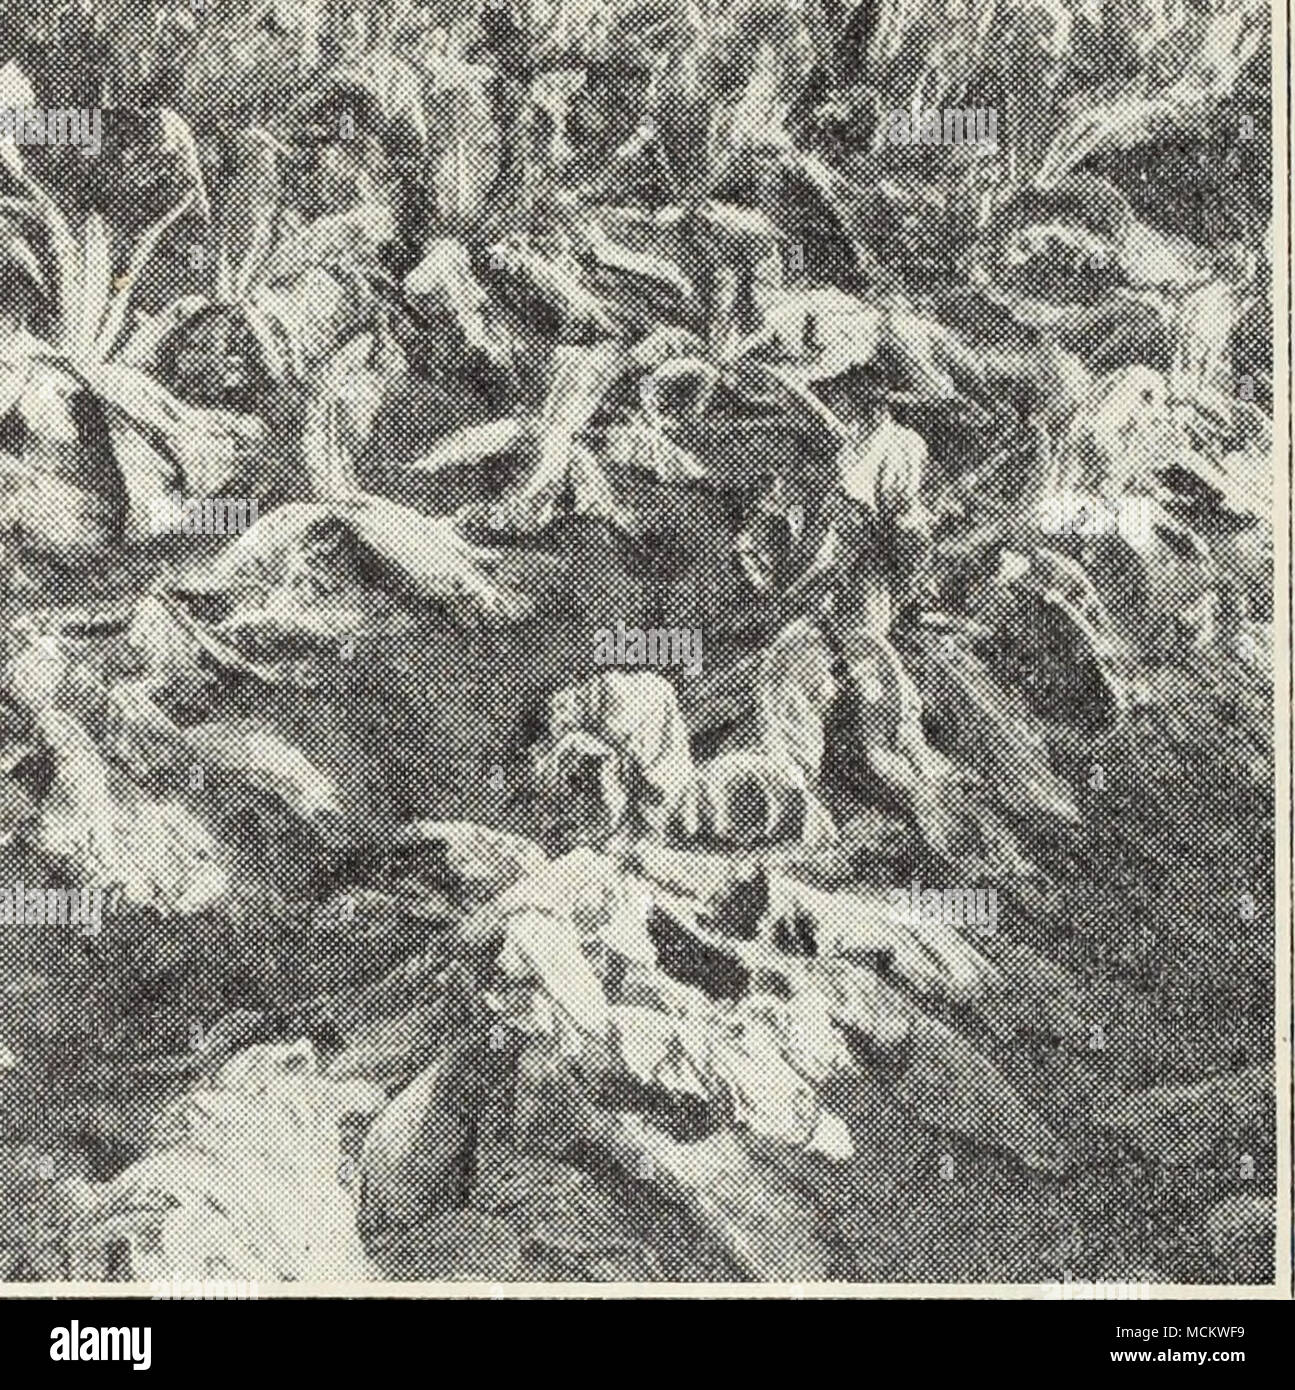 . Fig. 23.—Cauliflower plants affected by root rot in a low, wet corner of the field. fected plants is the only method known at present for holding these virus diseases in check. White Rust.—In this disease, the stems, leaves, or flower stalks may be swollen and deformed. White, blisterlike, spore pustules of the fungus. Albugo Candida, appear on the surface. The disease is not often serious, but is most common on radish and certain cruciferous weeds like shep- herd's purse. Affected plants should be destroyed. Yellows.—This is a very serious disease of cabbage in many parts of the country but Stock Photo